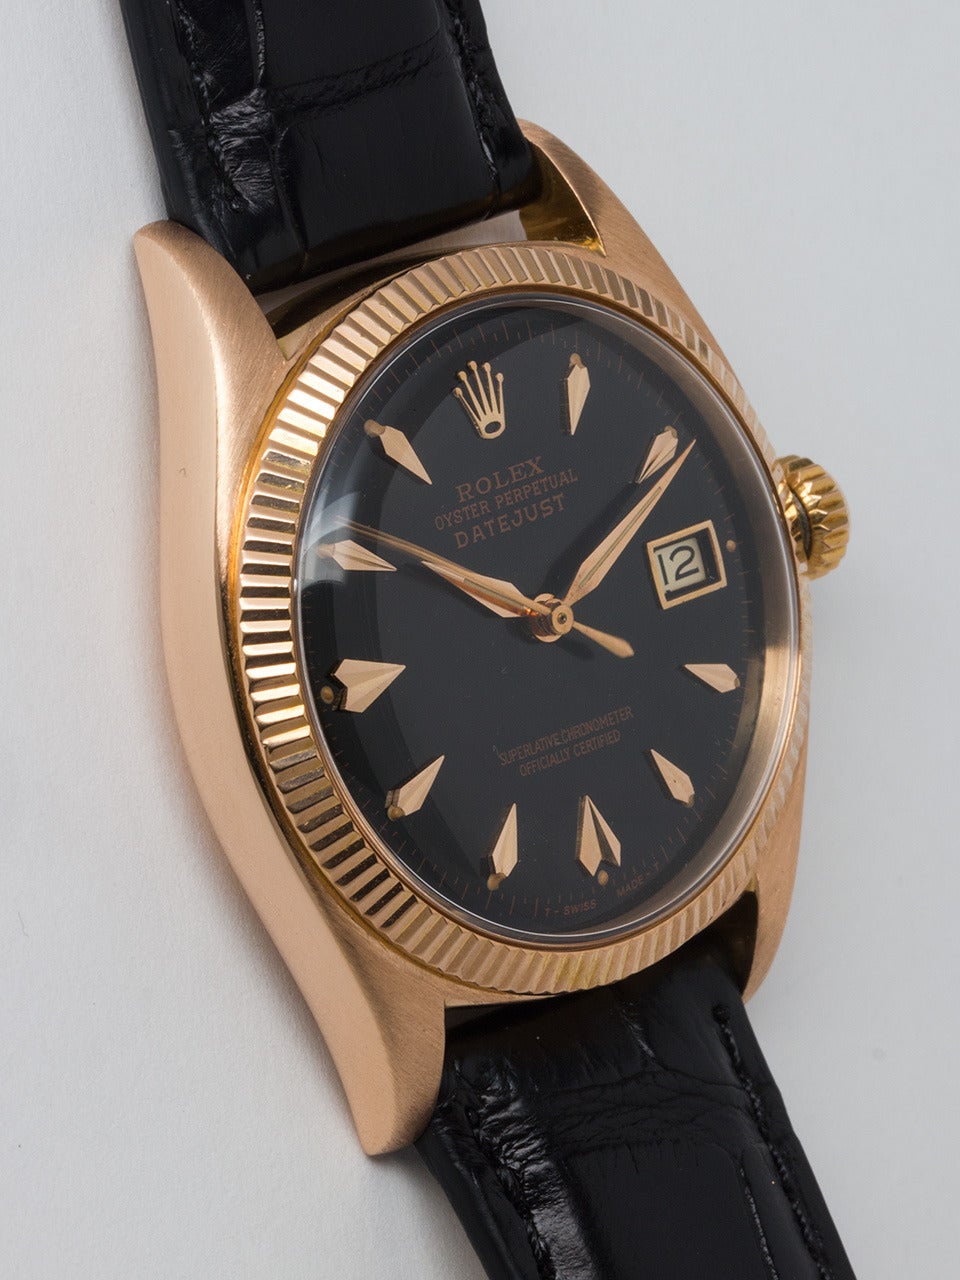 Rolex 18K Rose Gold Datejust Wristwatch ref 6605 serial # 486,xxx circa 1959. 36mm diiameter case with 18K rose gold finely milled bezel with an acrylic dome crystal without date magnifying cyclops for a clean look. Beautifully restored glossy black